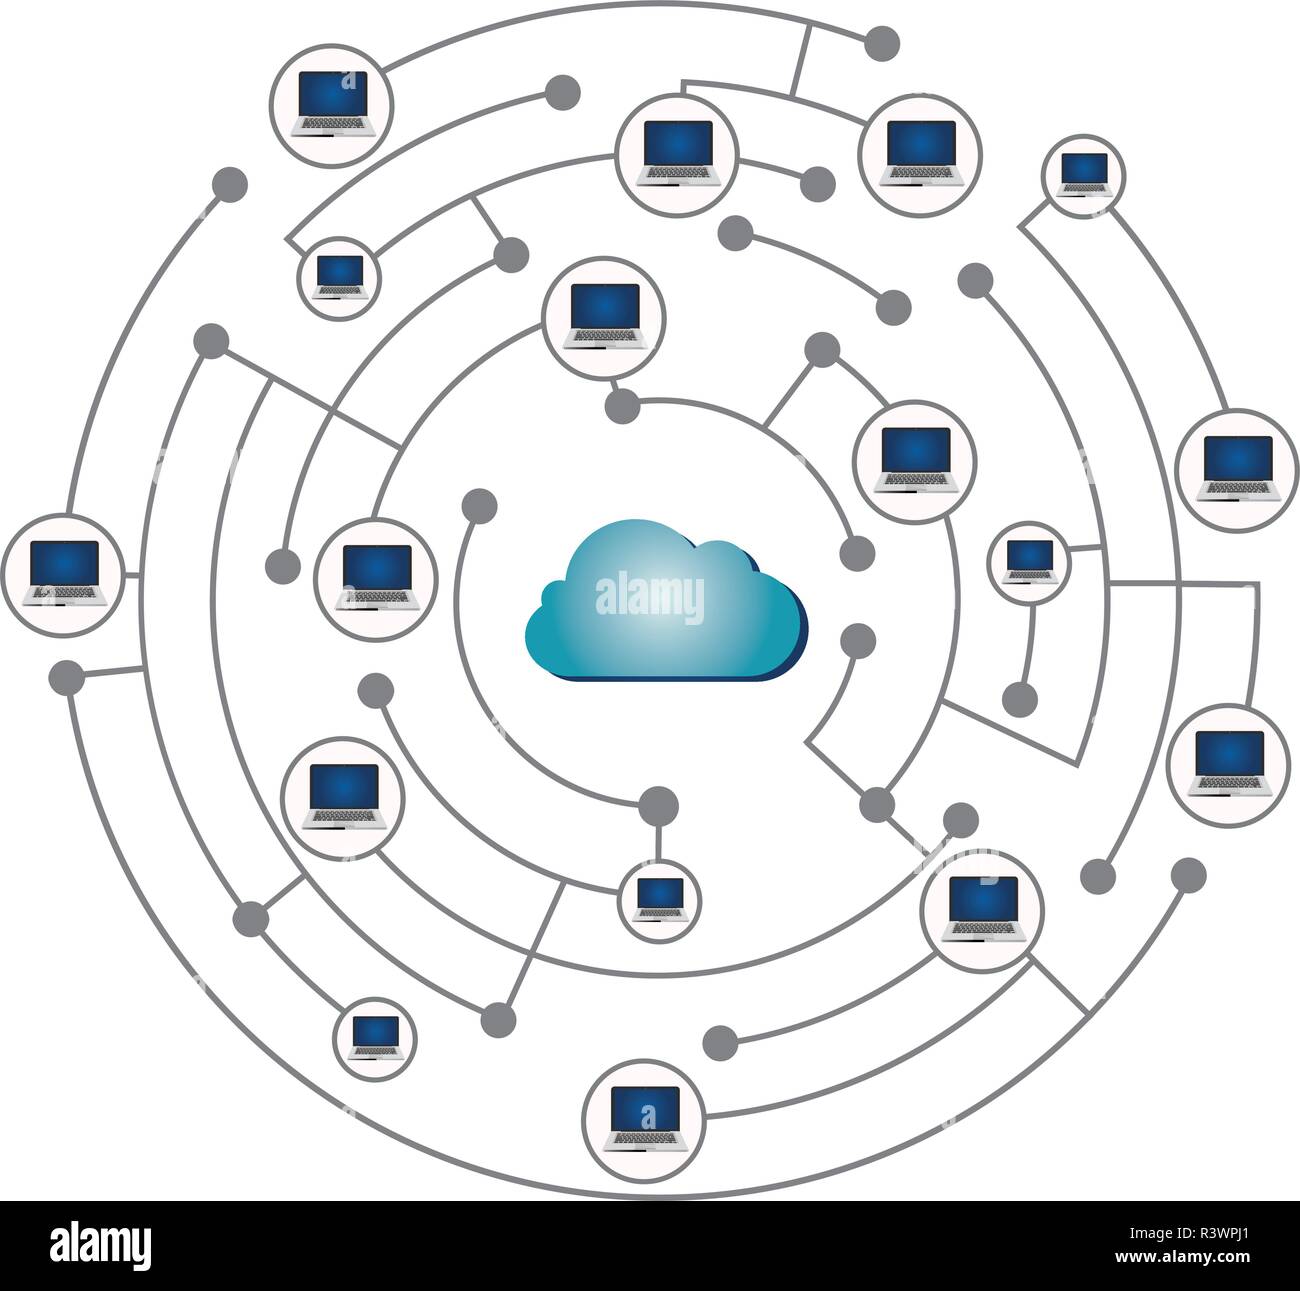 Networking in the cloud, cloud computing concept Stock Vector